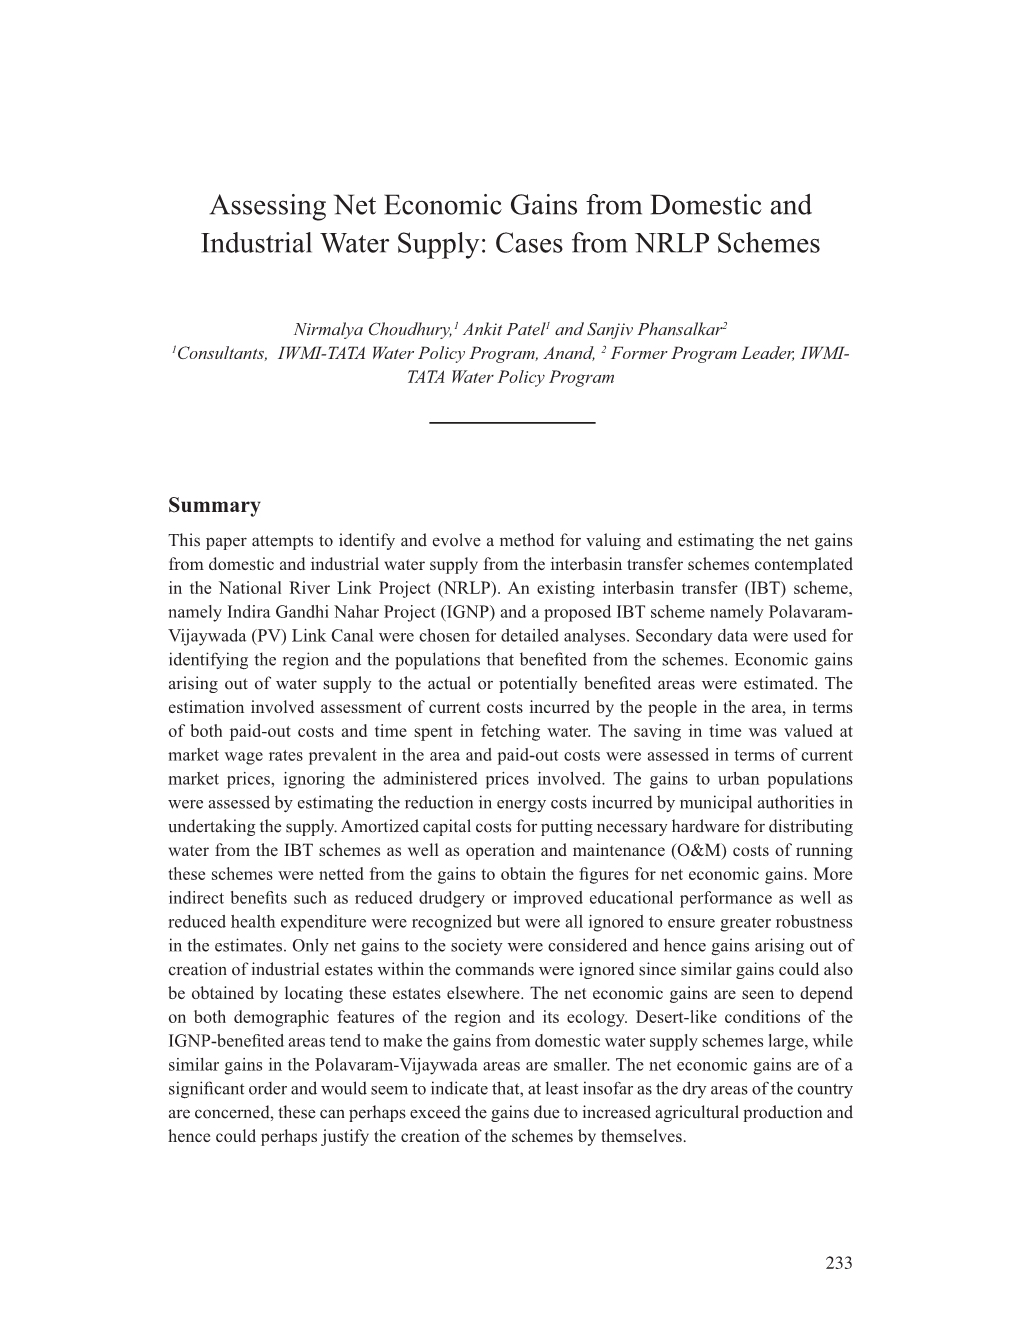 Assessing Net Economic Gains from Domestic and Industrial Water Supply: Cases from NRLP Schemes